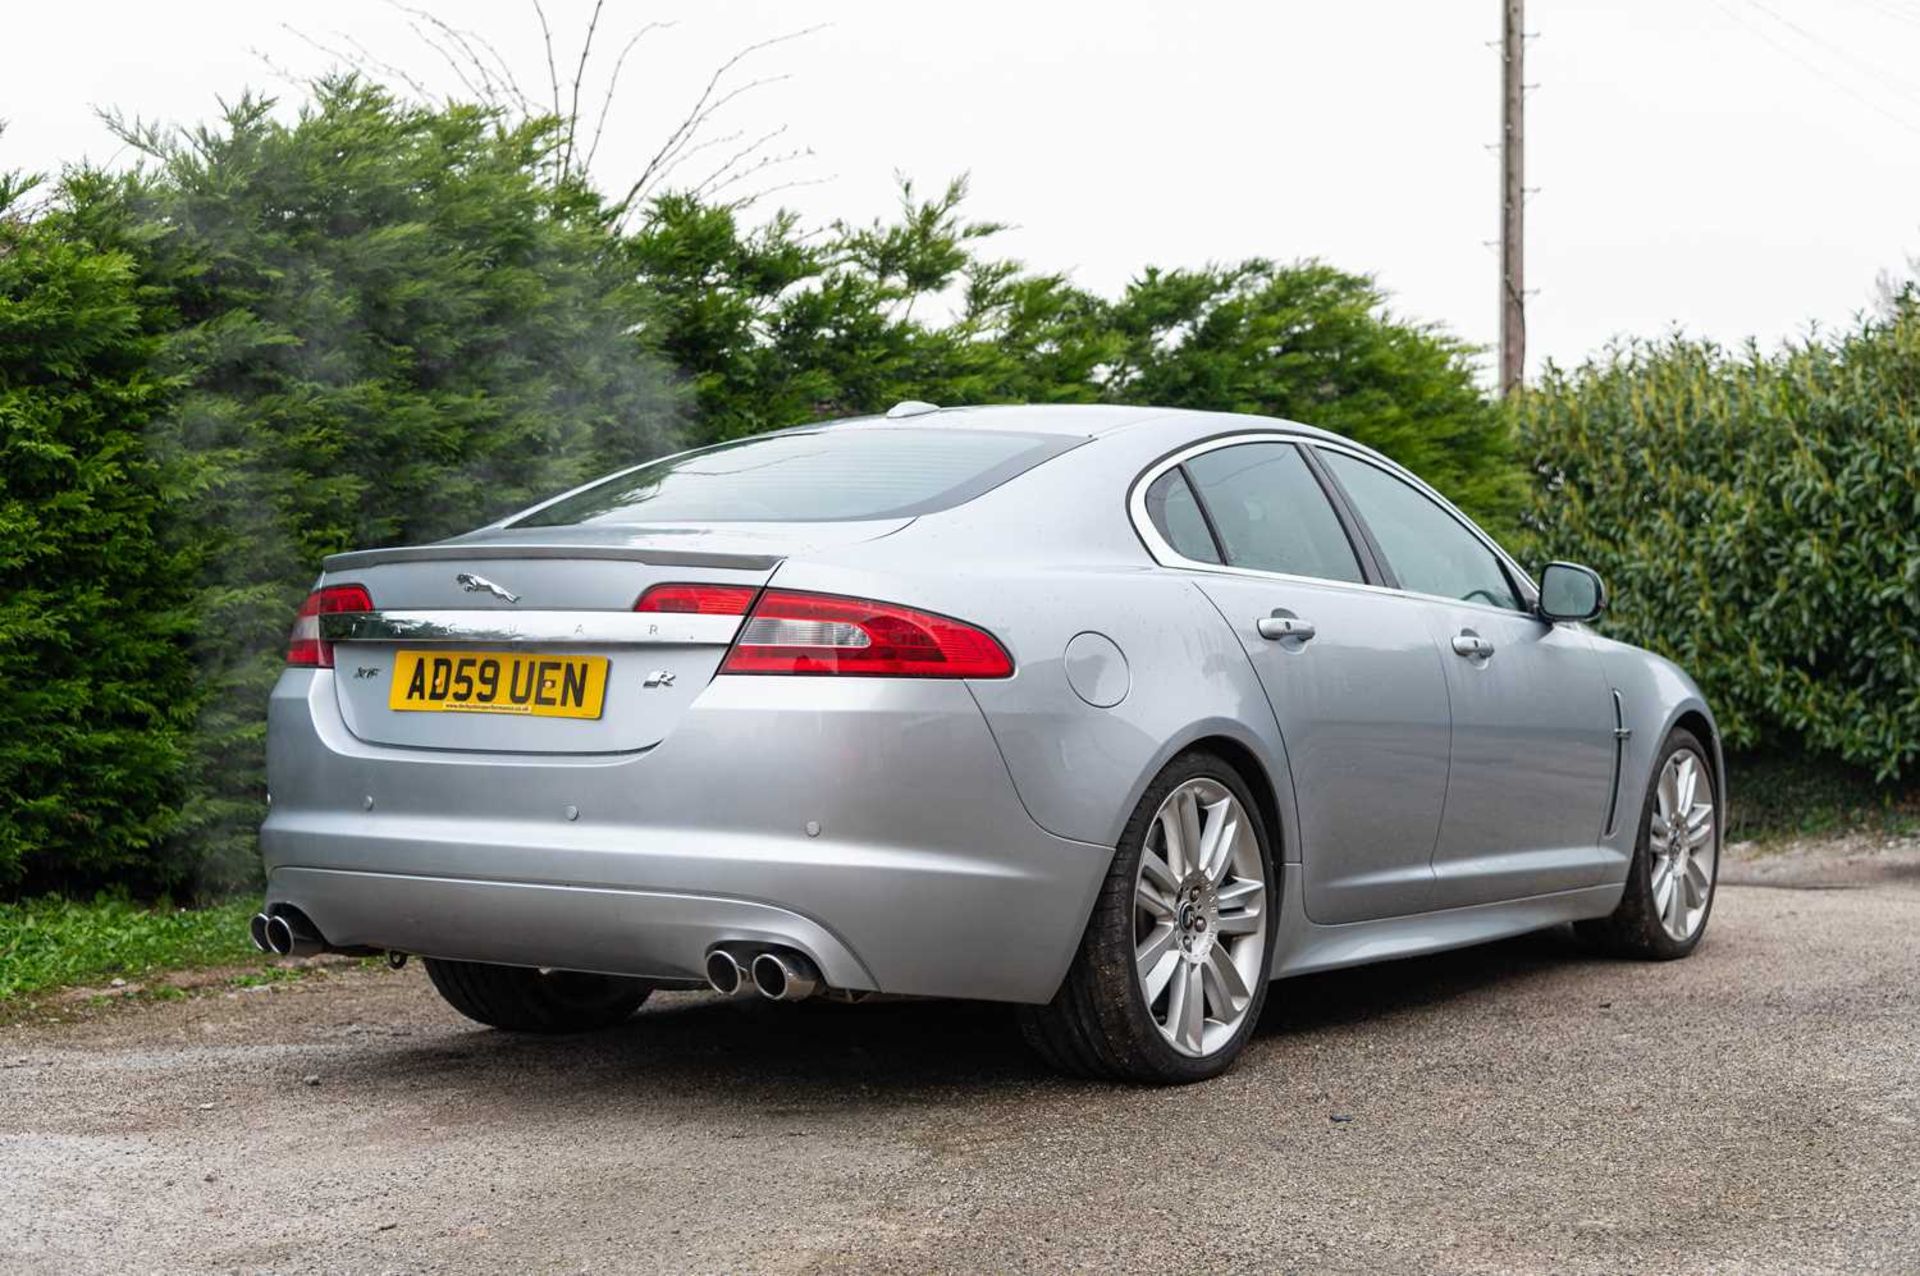 2009 Jaguar XFR Saloon 500 horsepower four-door super saloon, with full service history - Image 15 of 81